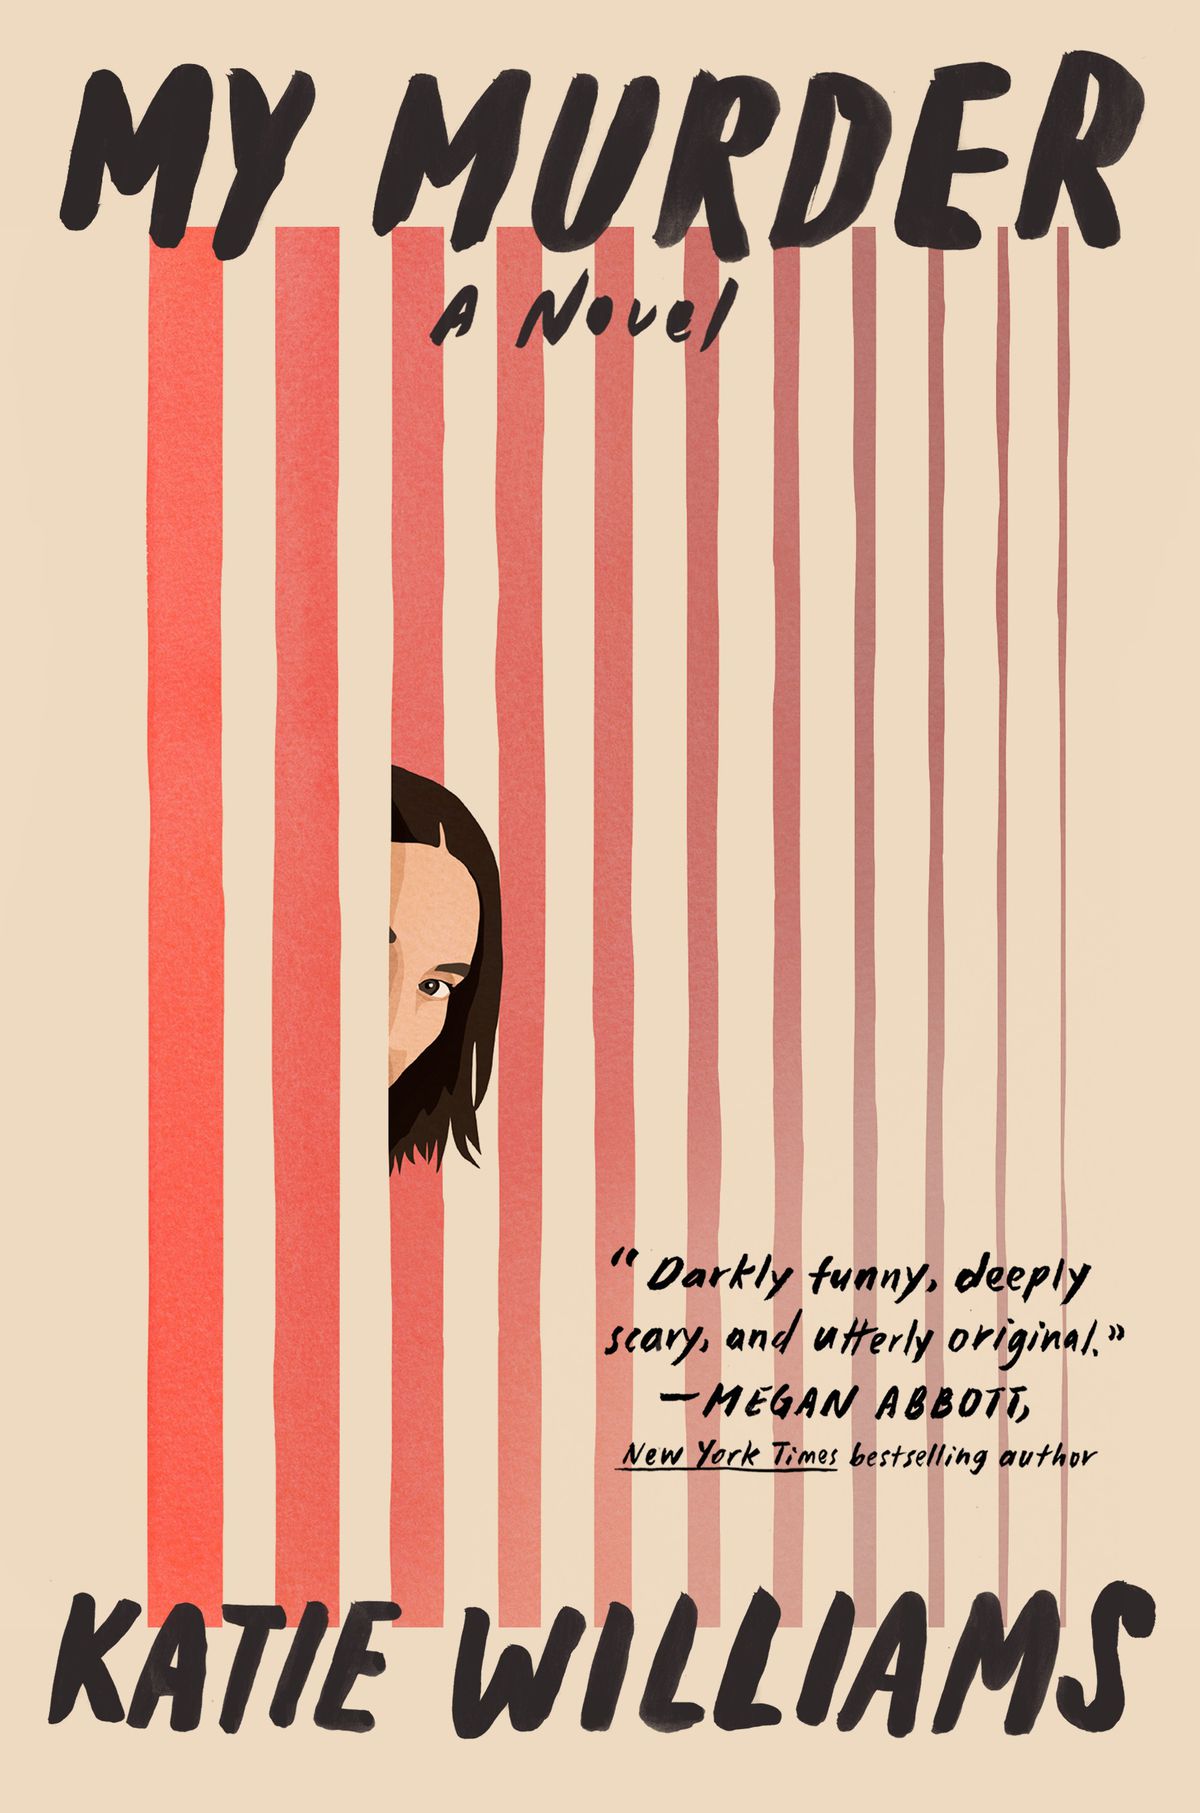 Cover image for Katie Williams’ My Murder, showing a woman’s face peering outside of red vertical lines.